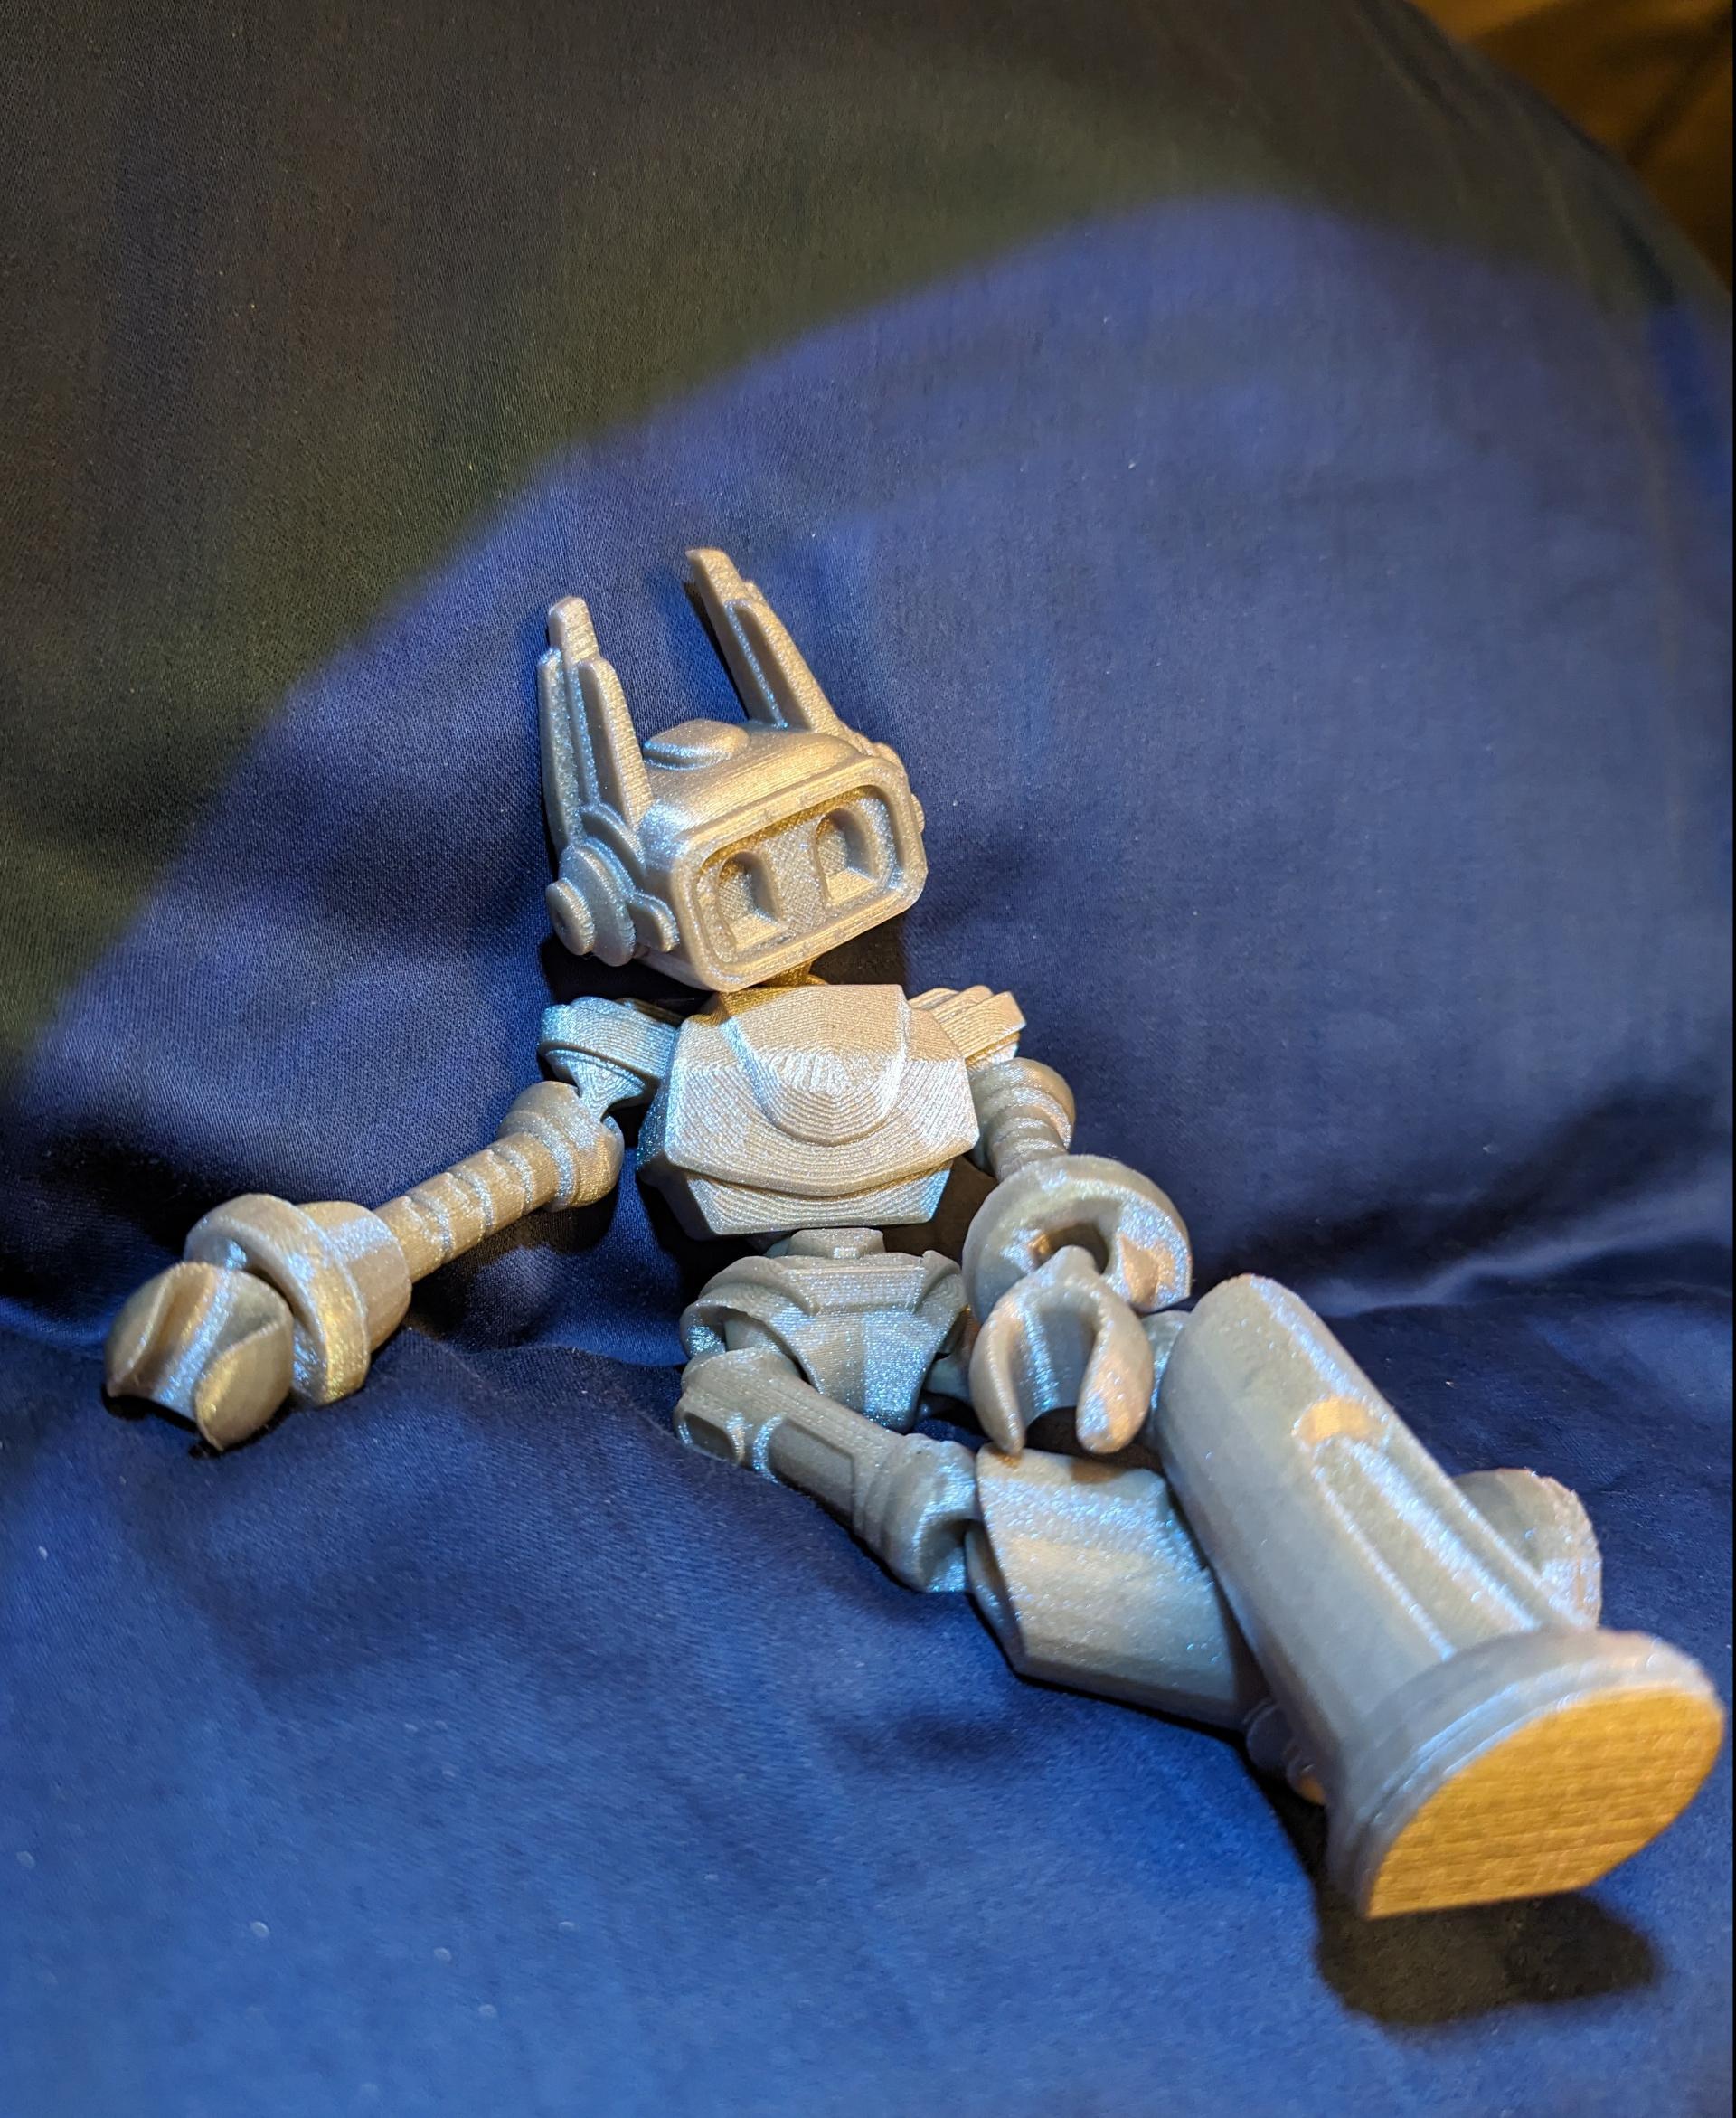 ZILLOLAAB - ZIPPY THE BOT 🤖 - Zippy the bot relaxing on the couch after a long week. Printed in Polymaker Starlight Mercury. - 3d model